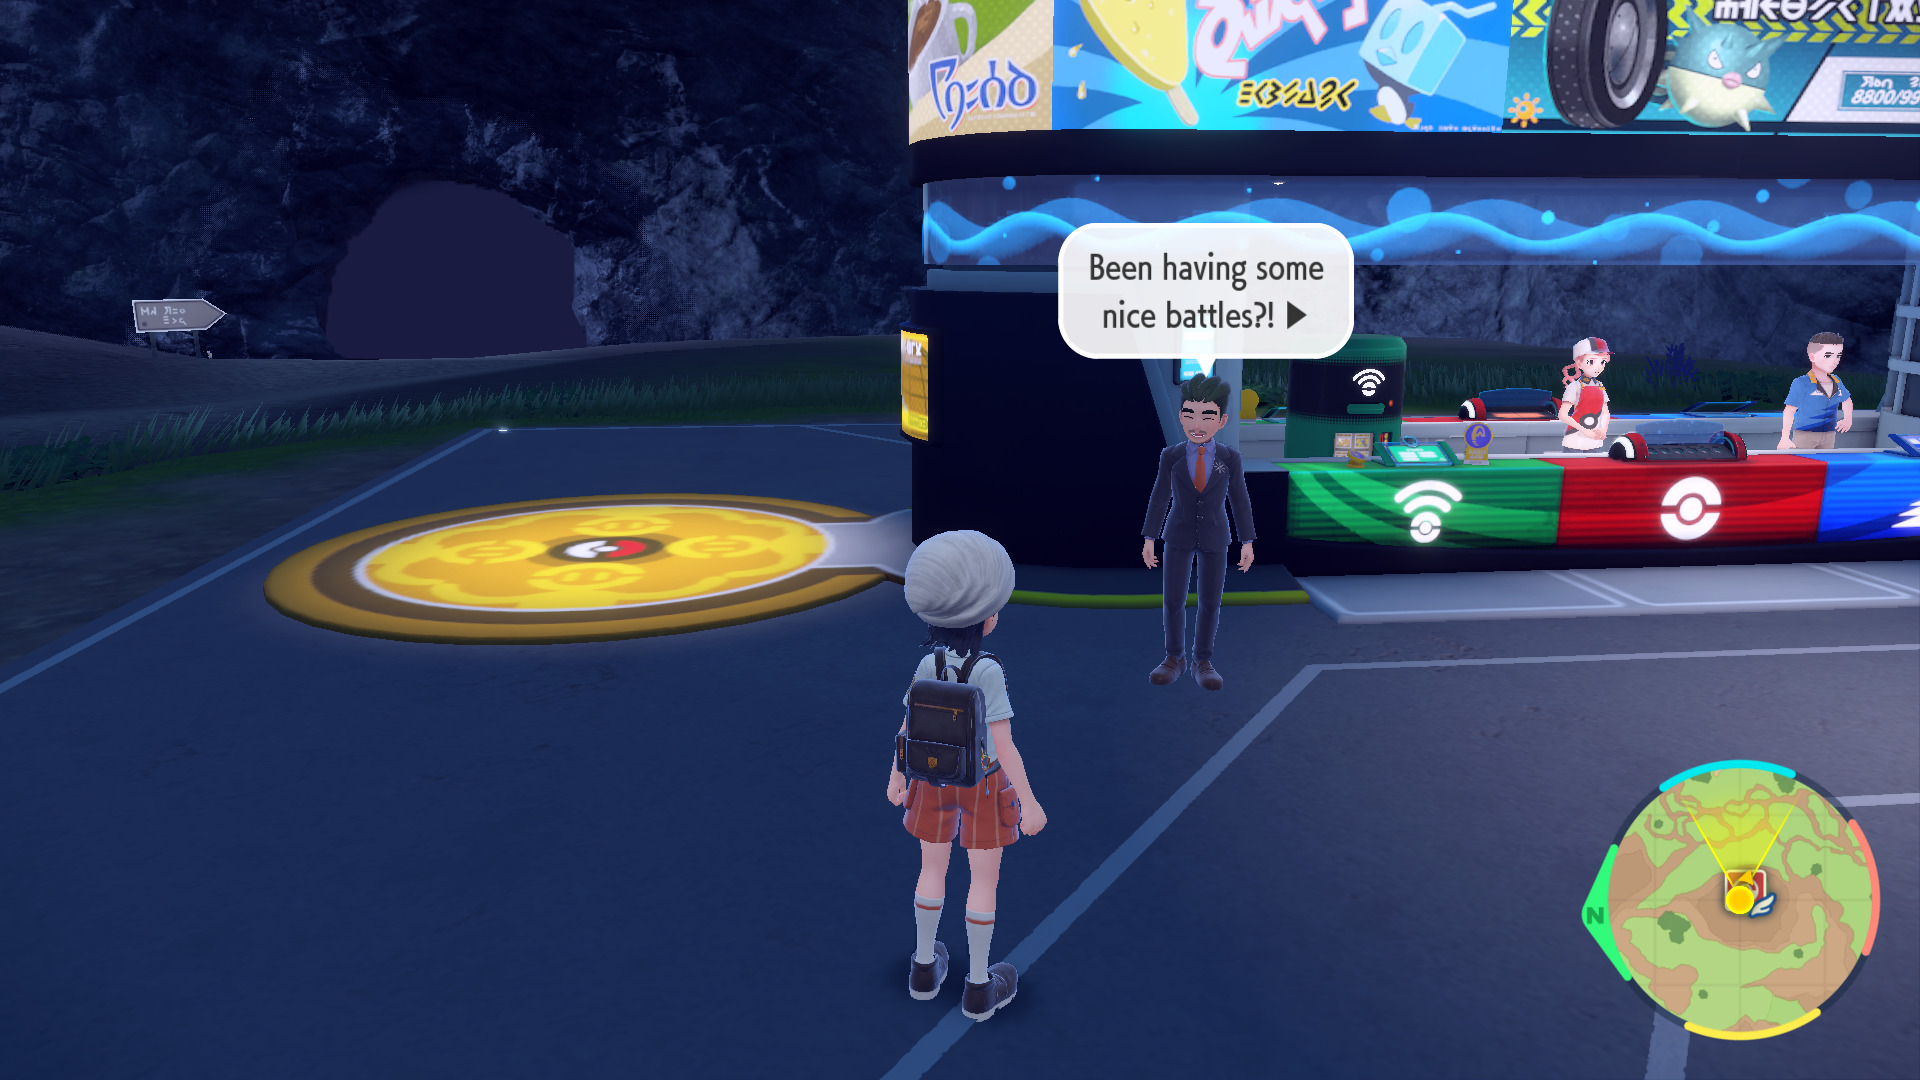 The Pokemon Rep can be found at the Dalizapa Passage Pokemon Center Pokemon Center.